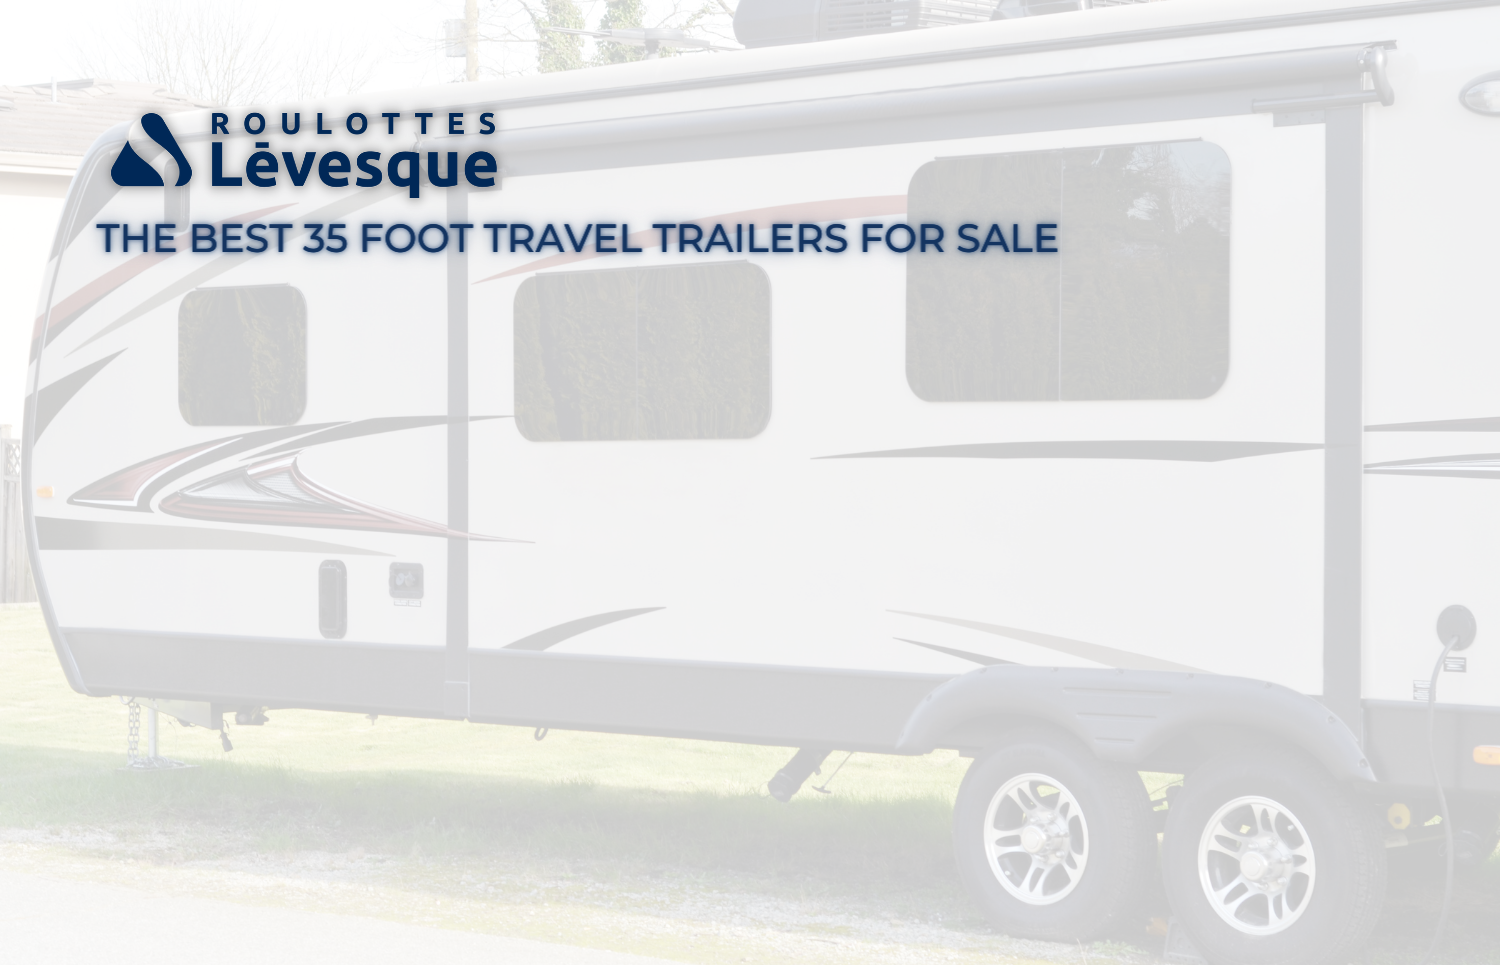 The best 35 Foot Travel Trailers for Sale